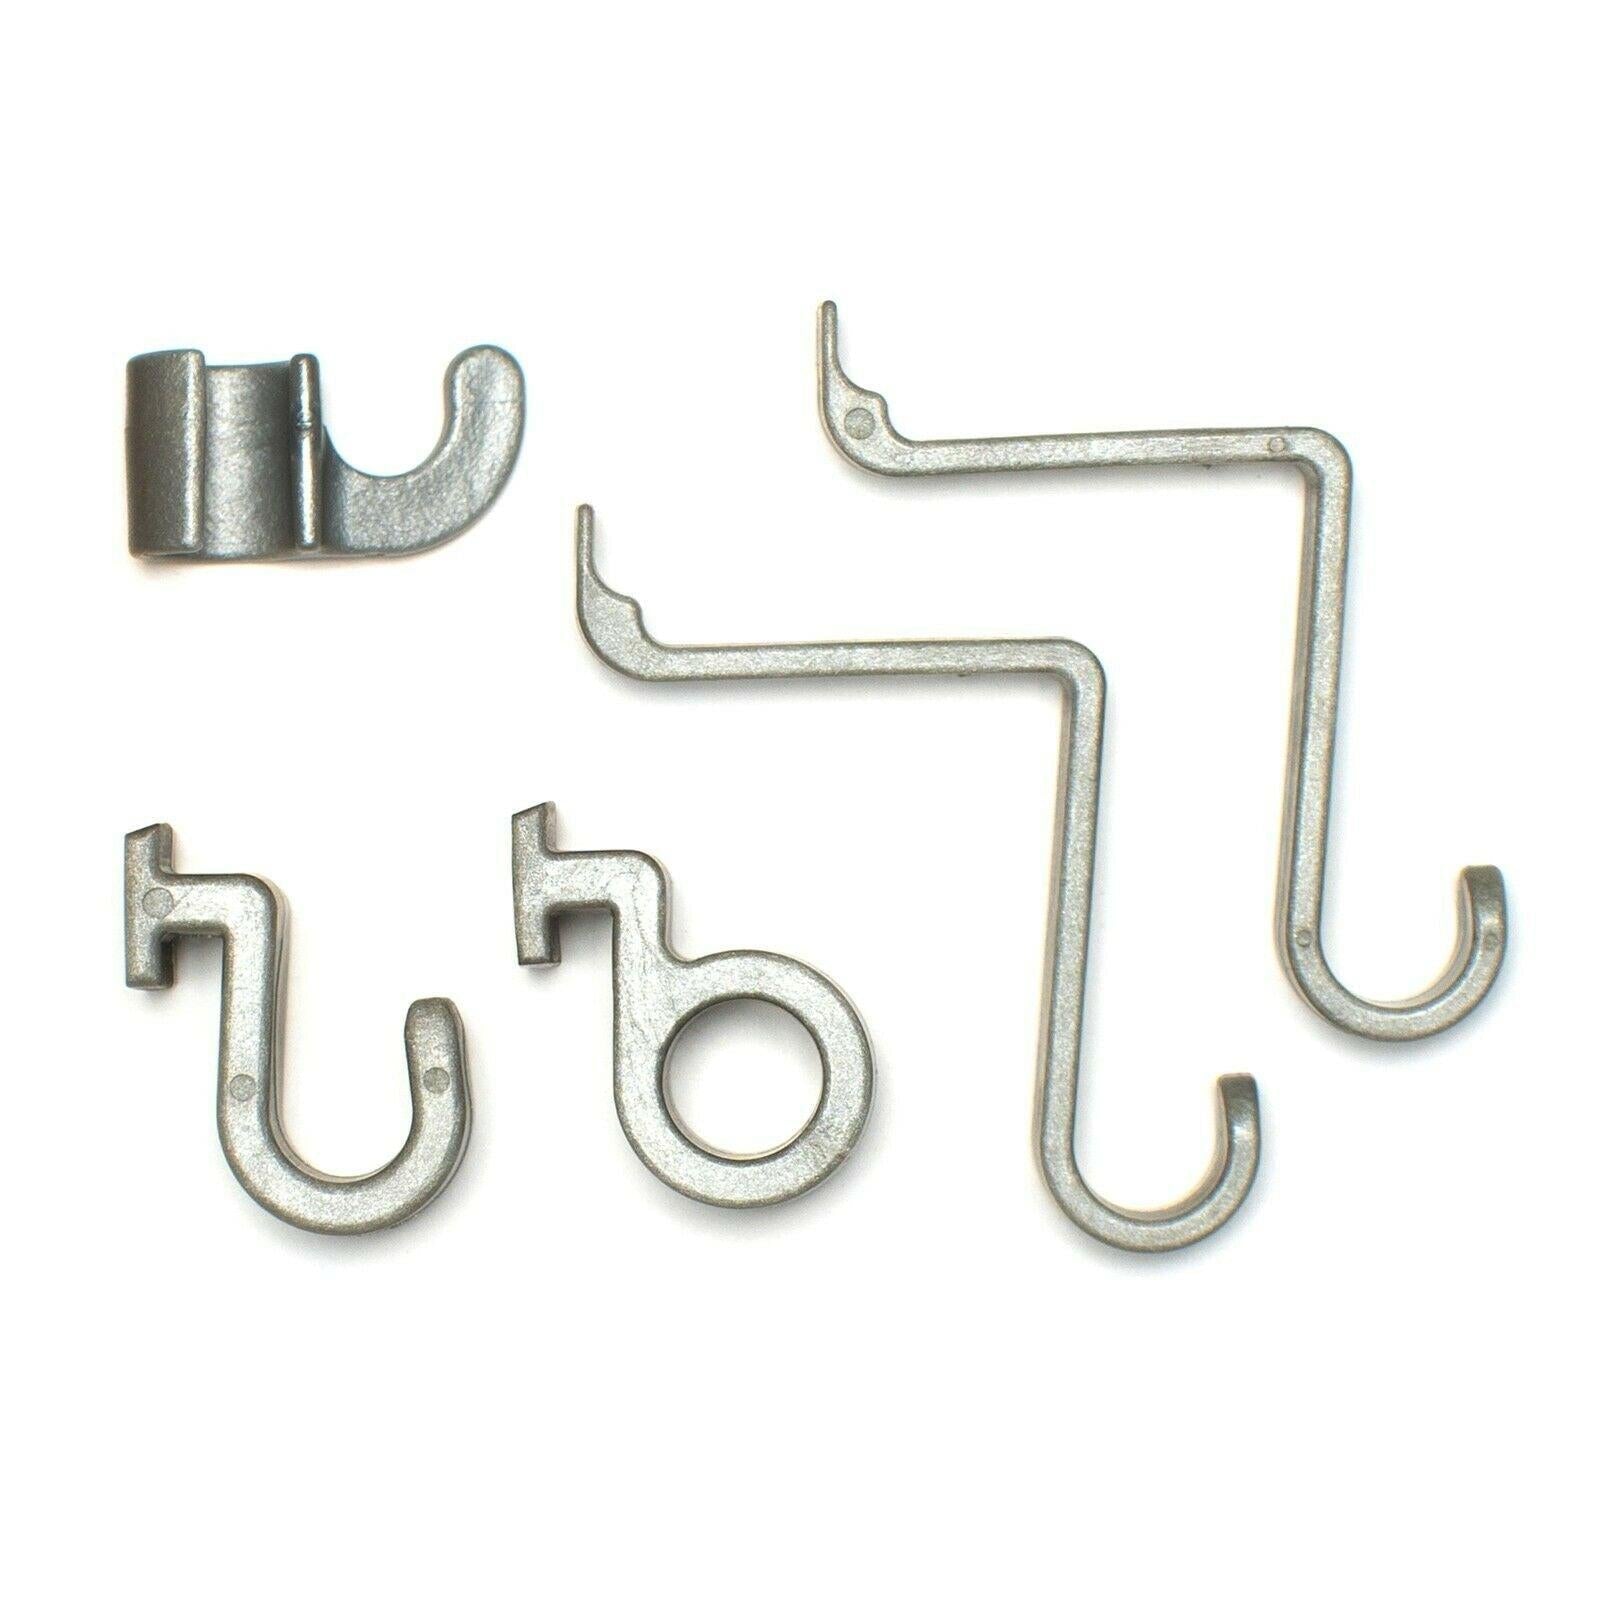 040Parts 5er hook set suitable for VW T5 T6.1 California Beach Bulli Camper  - Mixcover